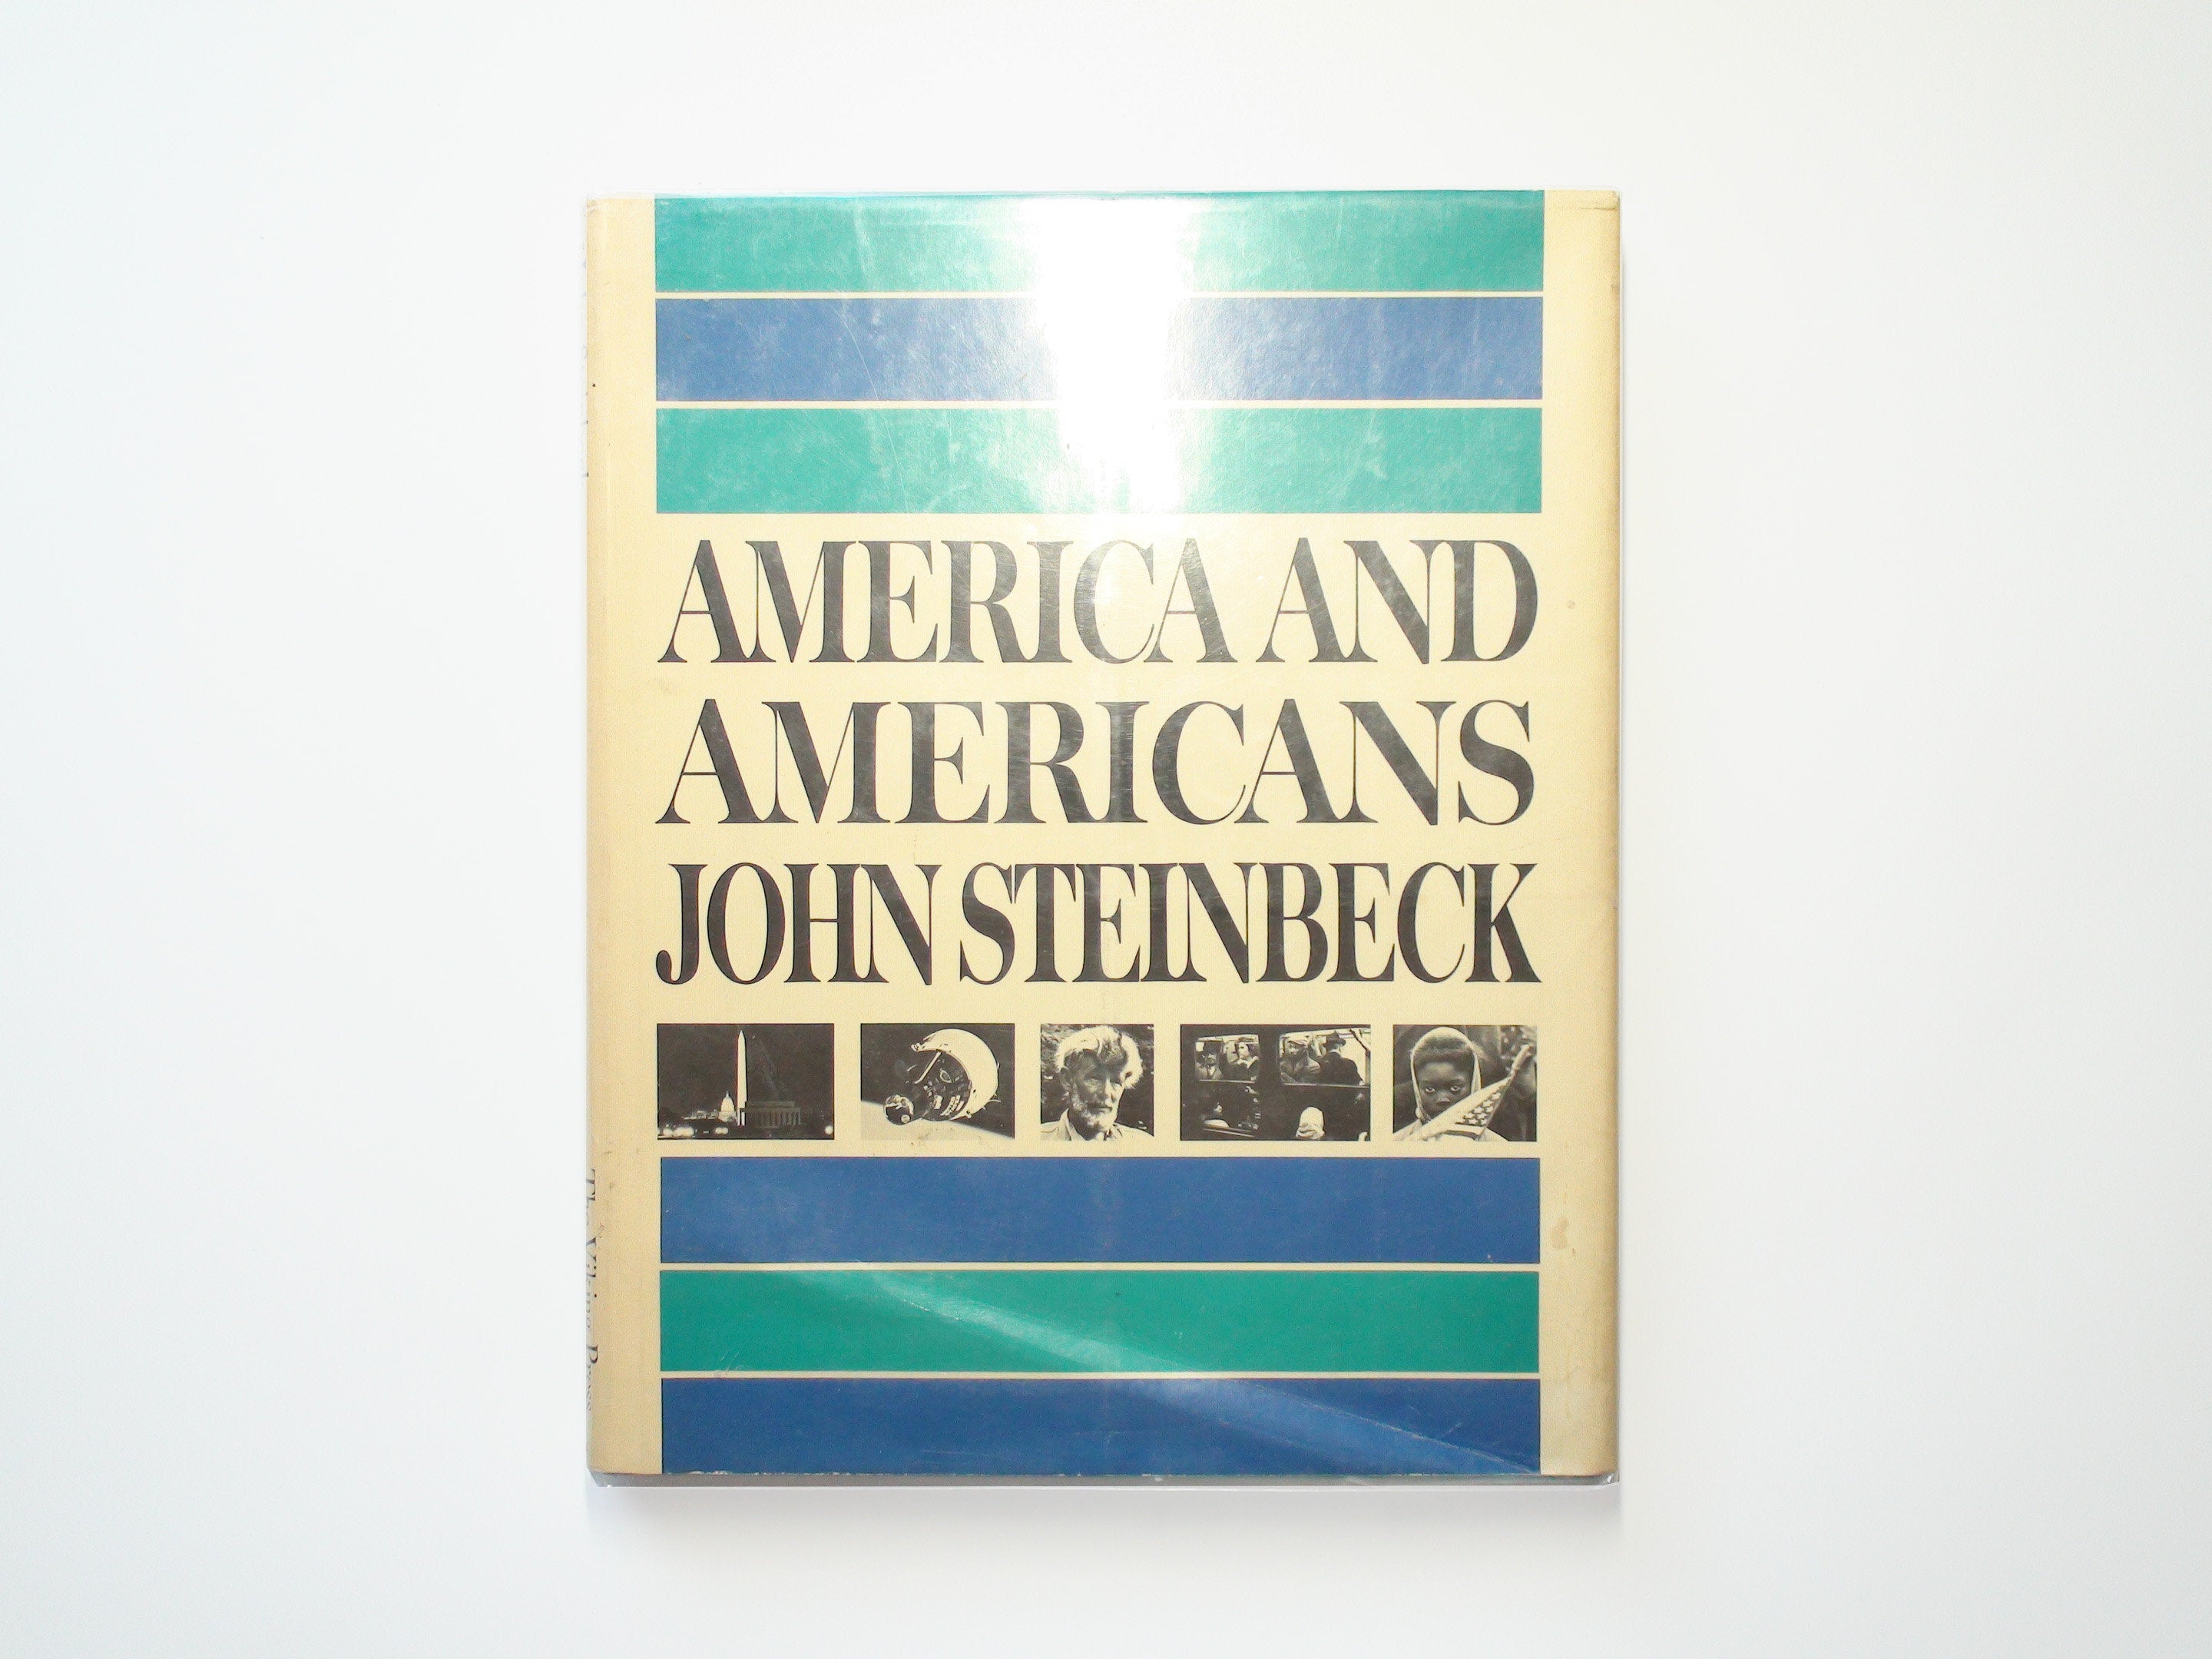 America and Americans, John Steinbeck, 1st Ed, 2nd Printing, Illustrated, 1966